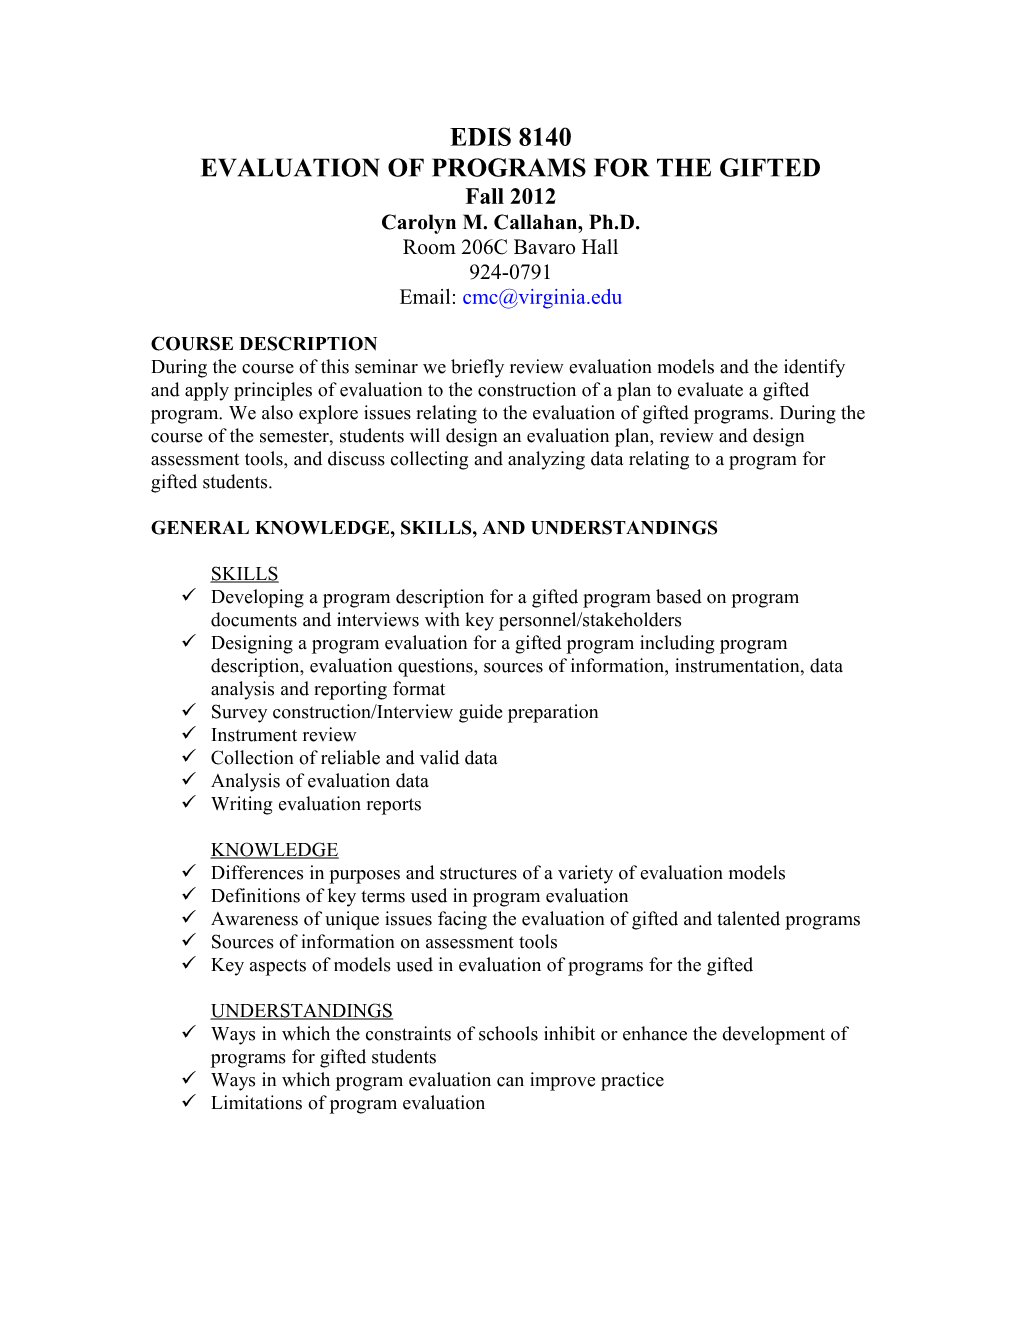 Evaluation of Programs for the Gifted